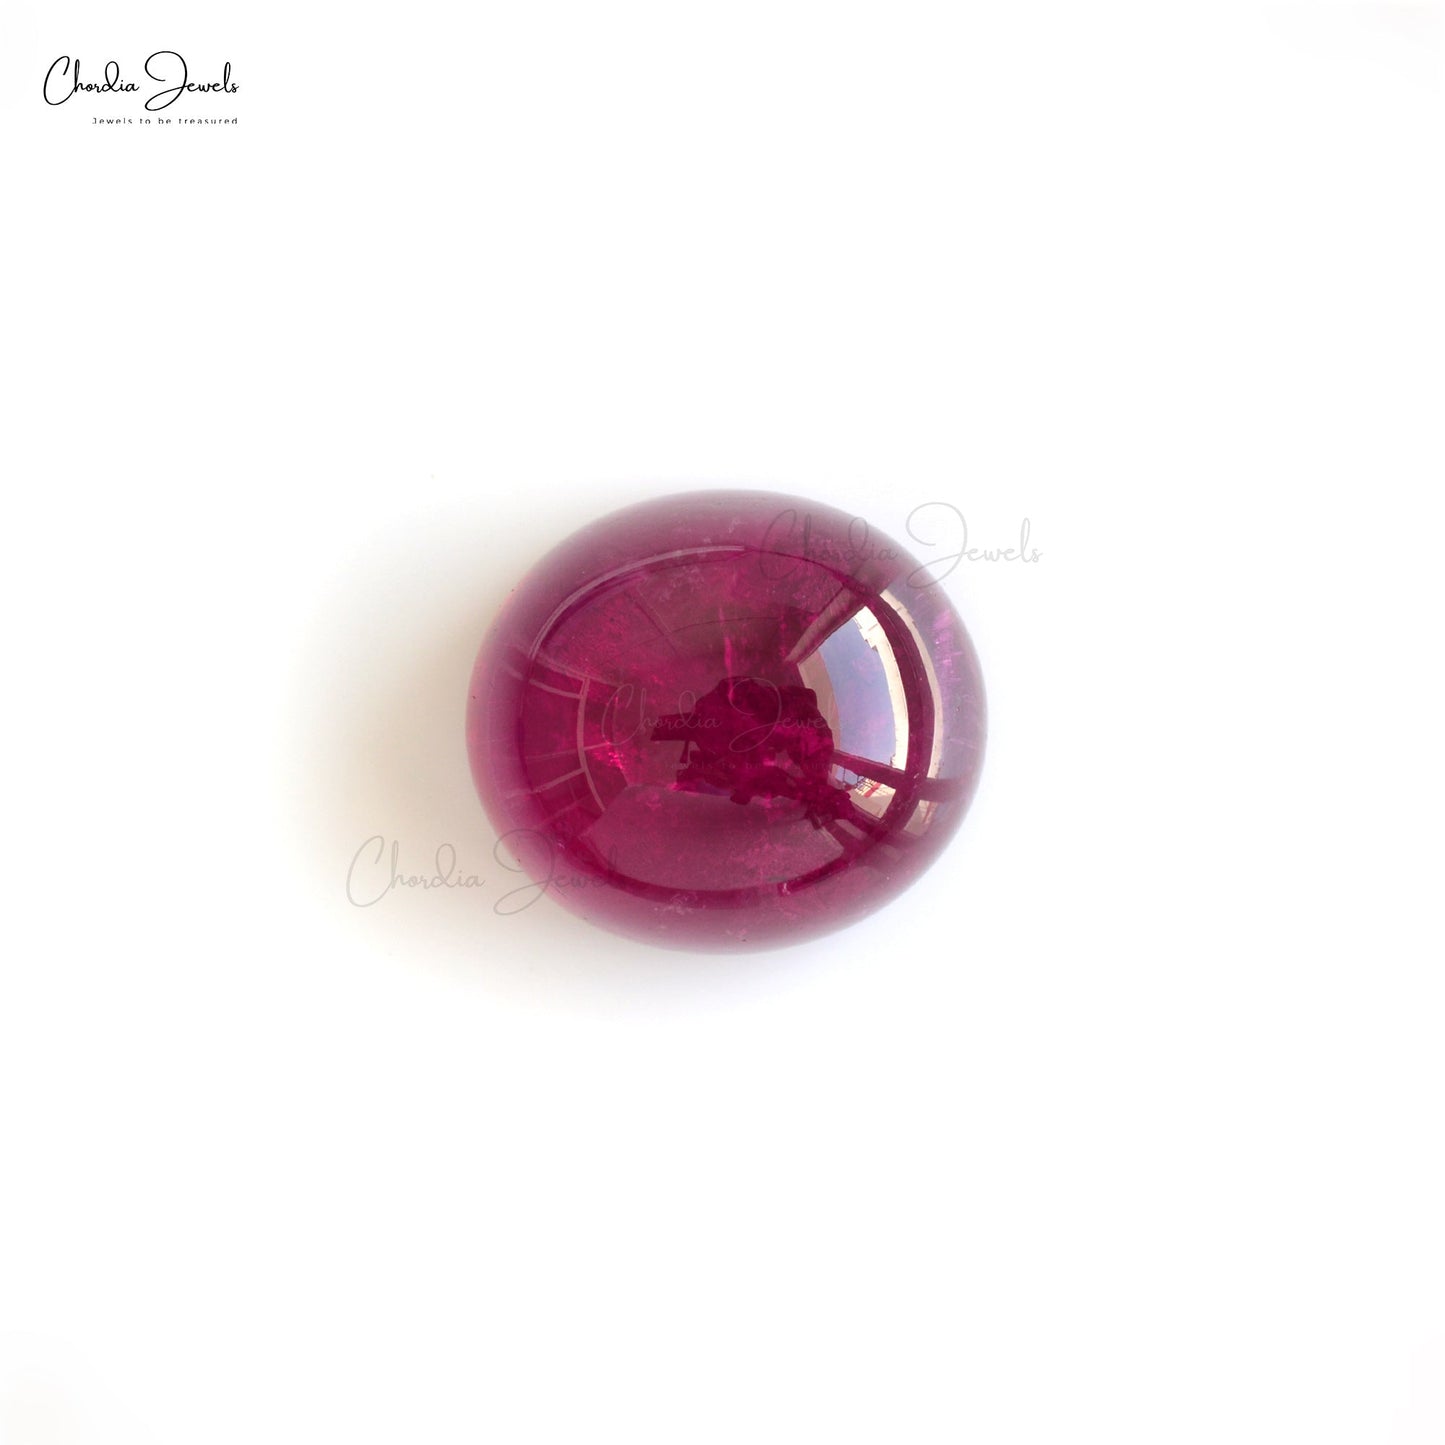 Oval Cabochon Rubellite Tourmaline 14.90 Carat Loose Gemstone for Making Necklace, 1 Piece